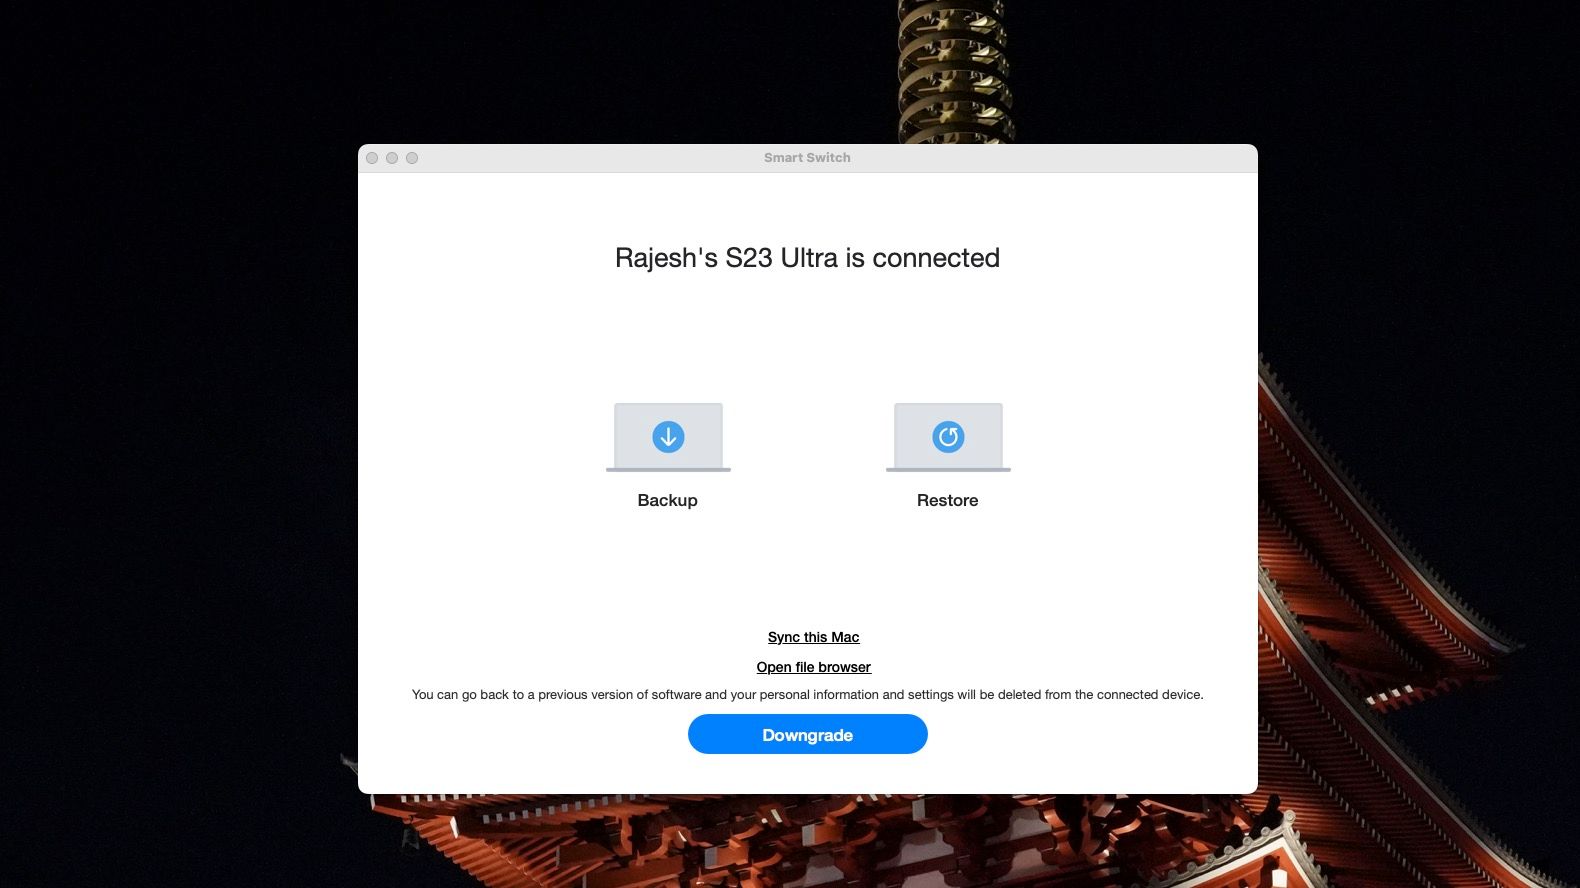 Samsung Smart Switch app on Mac showing Backup and Restore actions